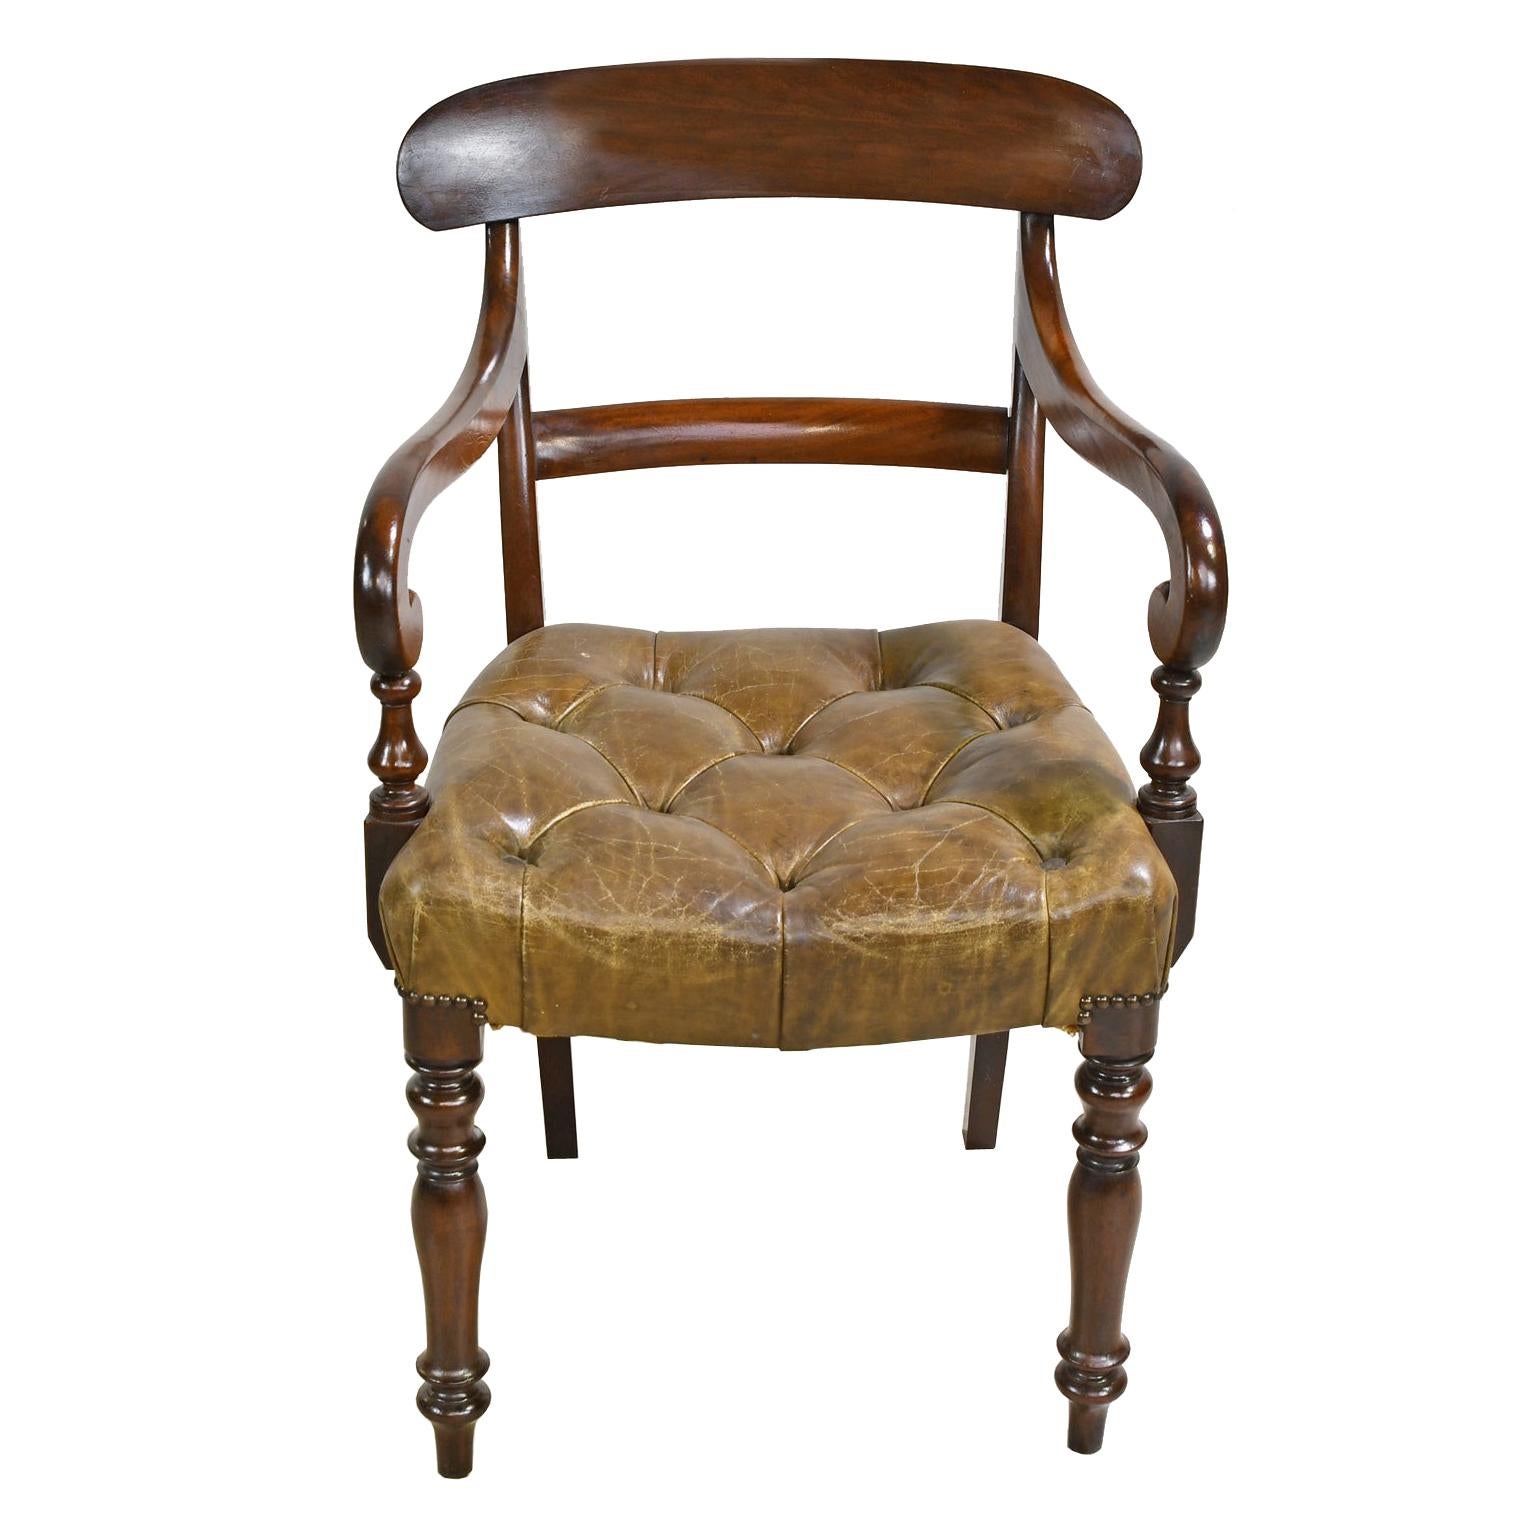 Early Victorian Mahogany Armchair with Tufted Leather Upholstery, England